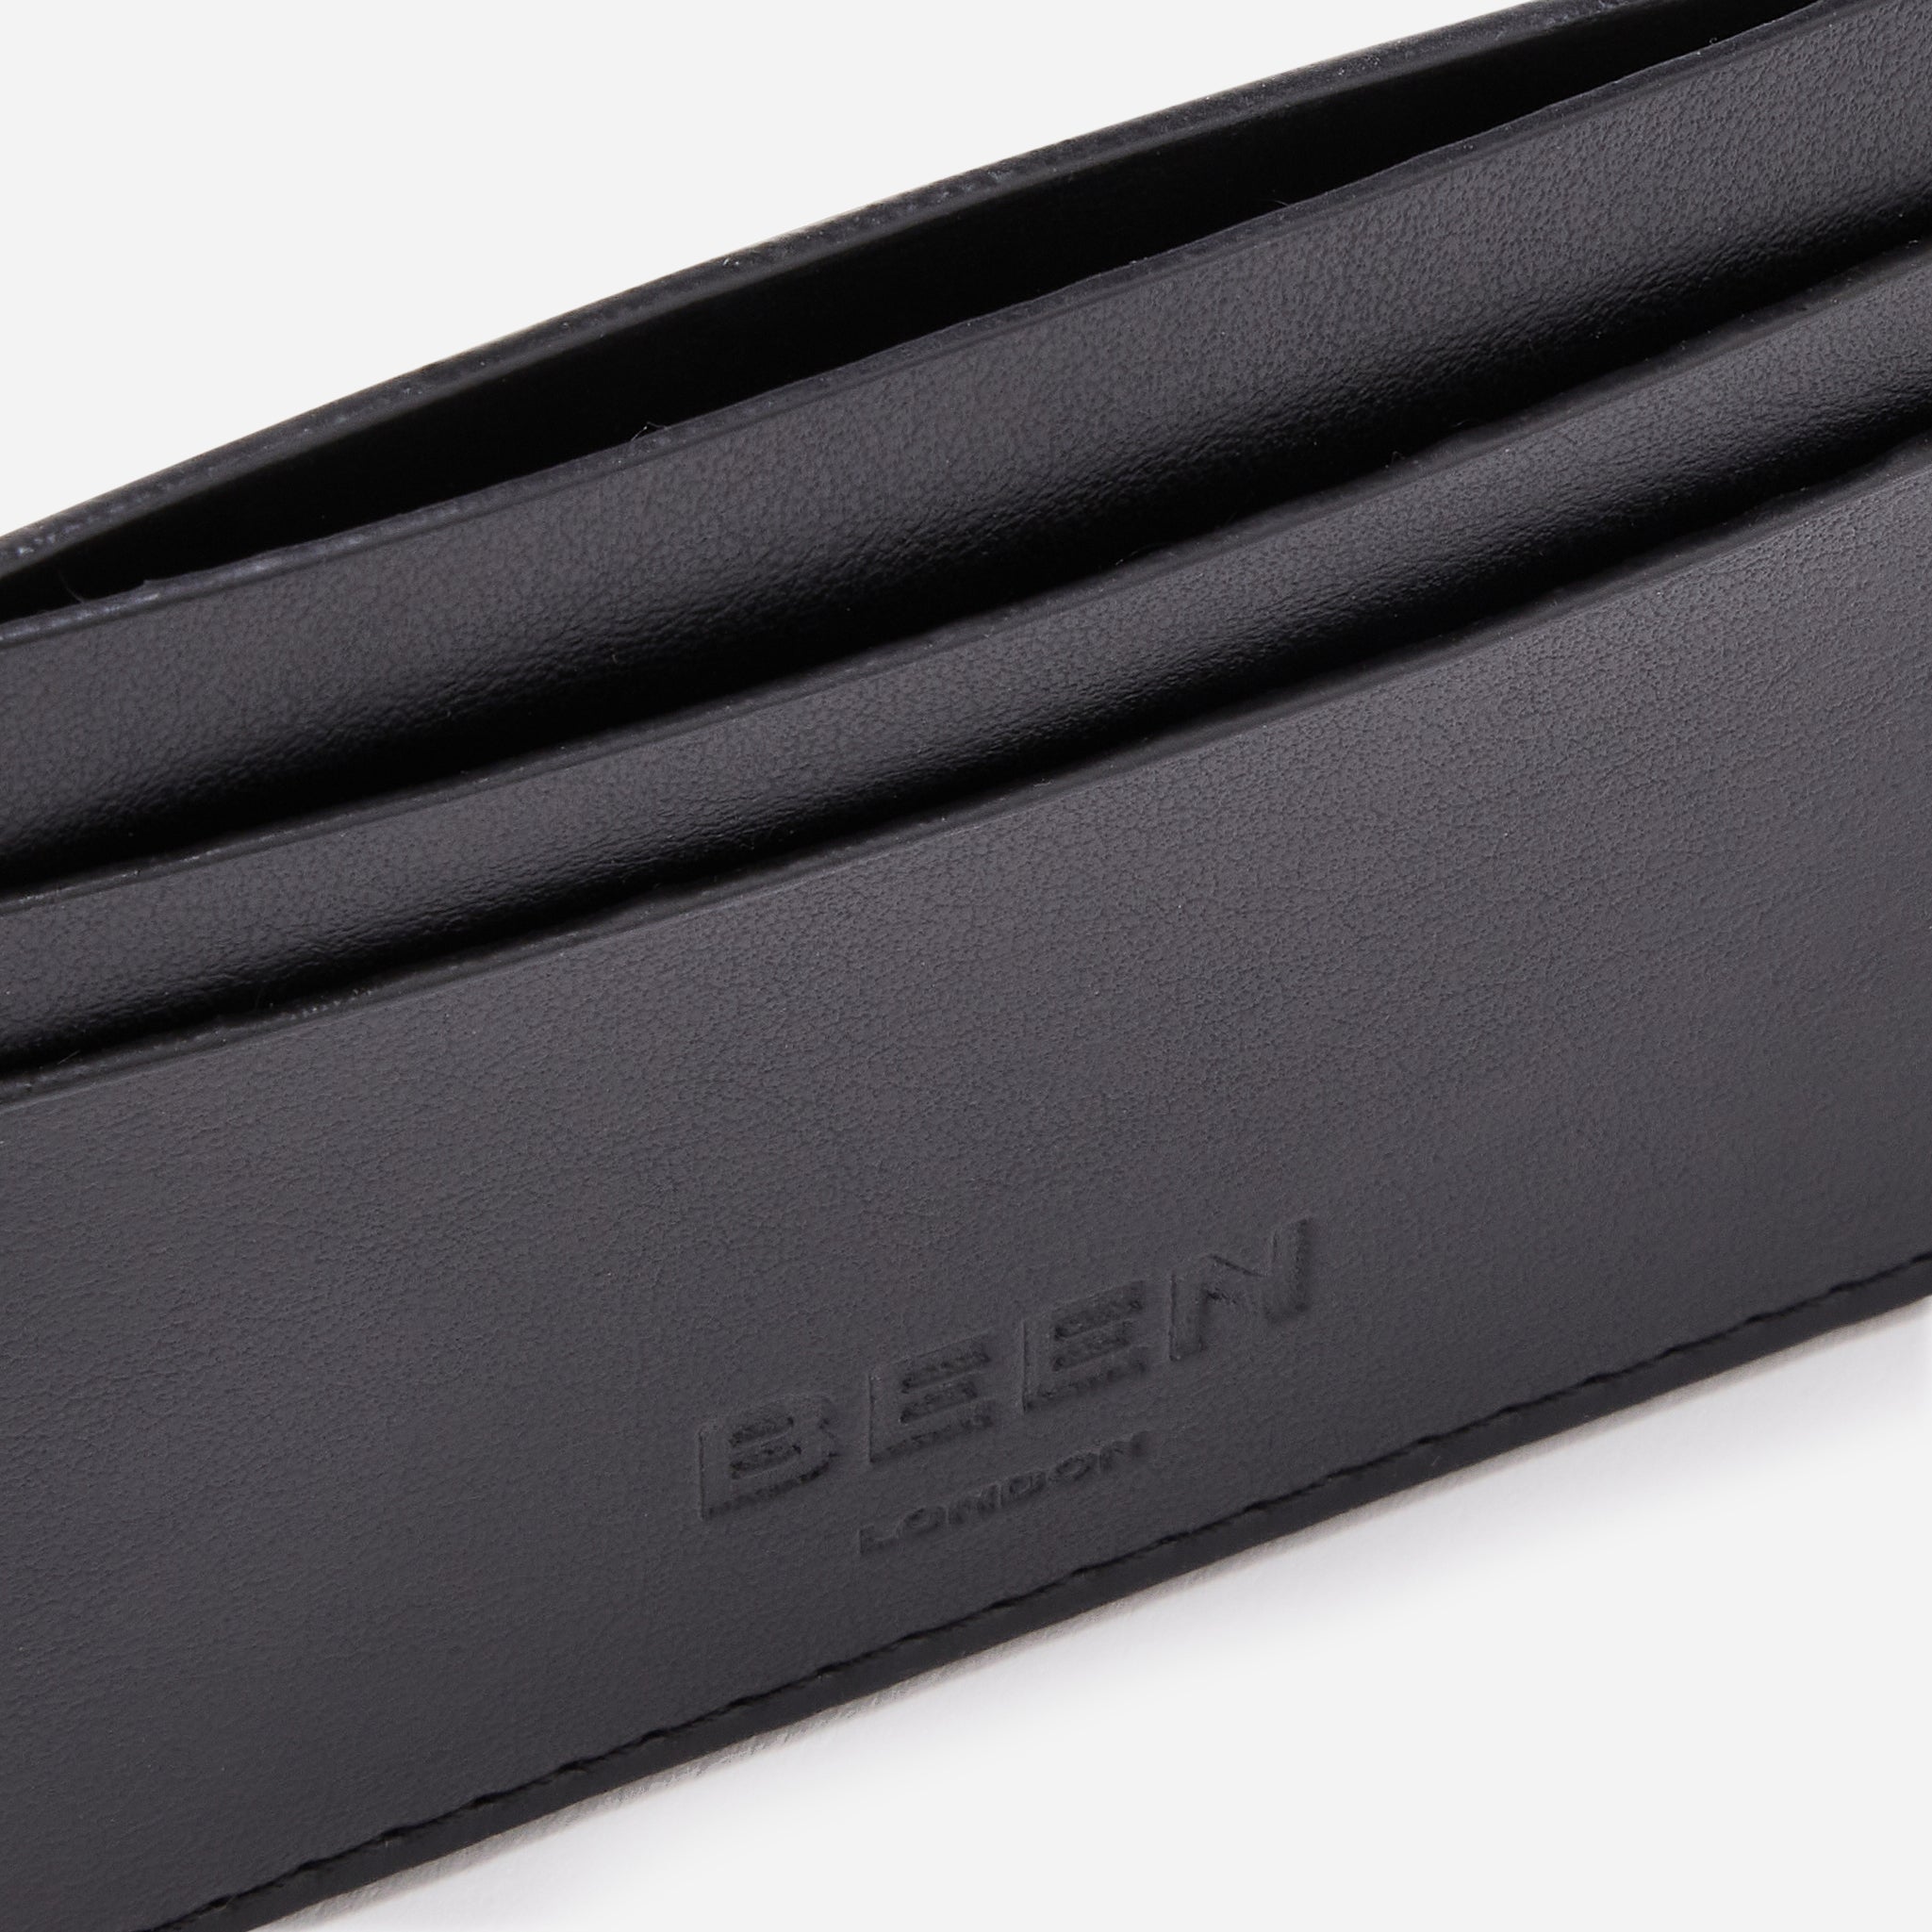 Vegan leather Wick Cardholder in Black onyx close up of the card openings in the front and the been london logo in the front bottom centre